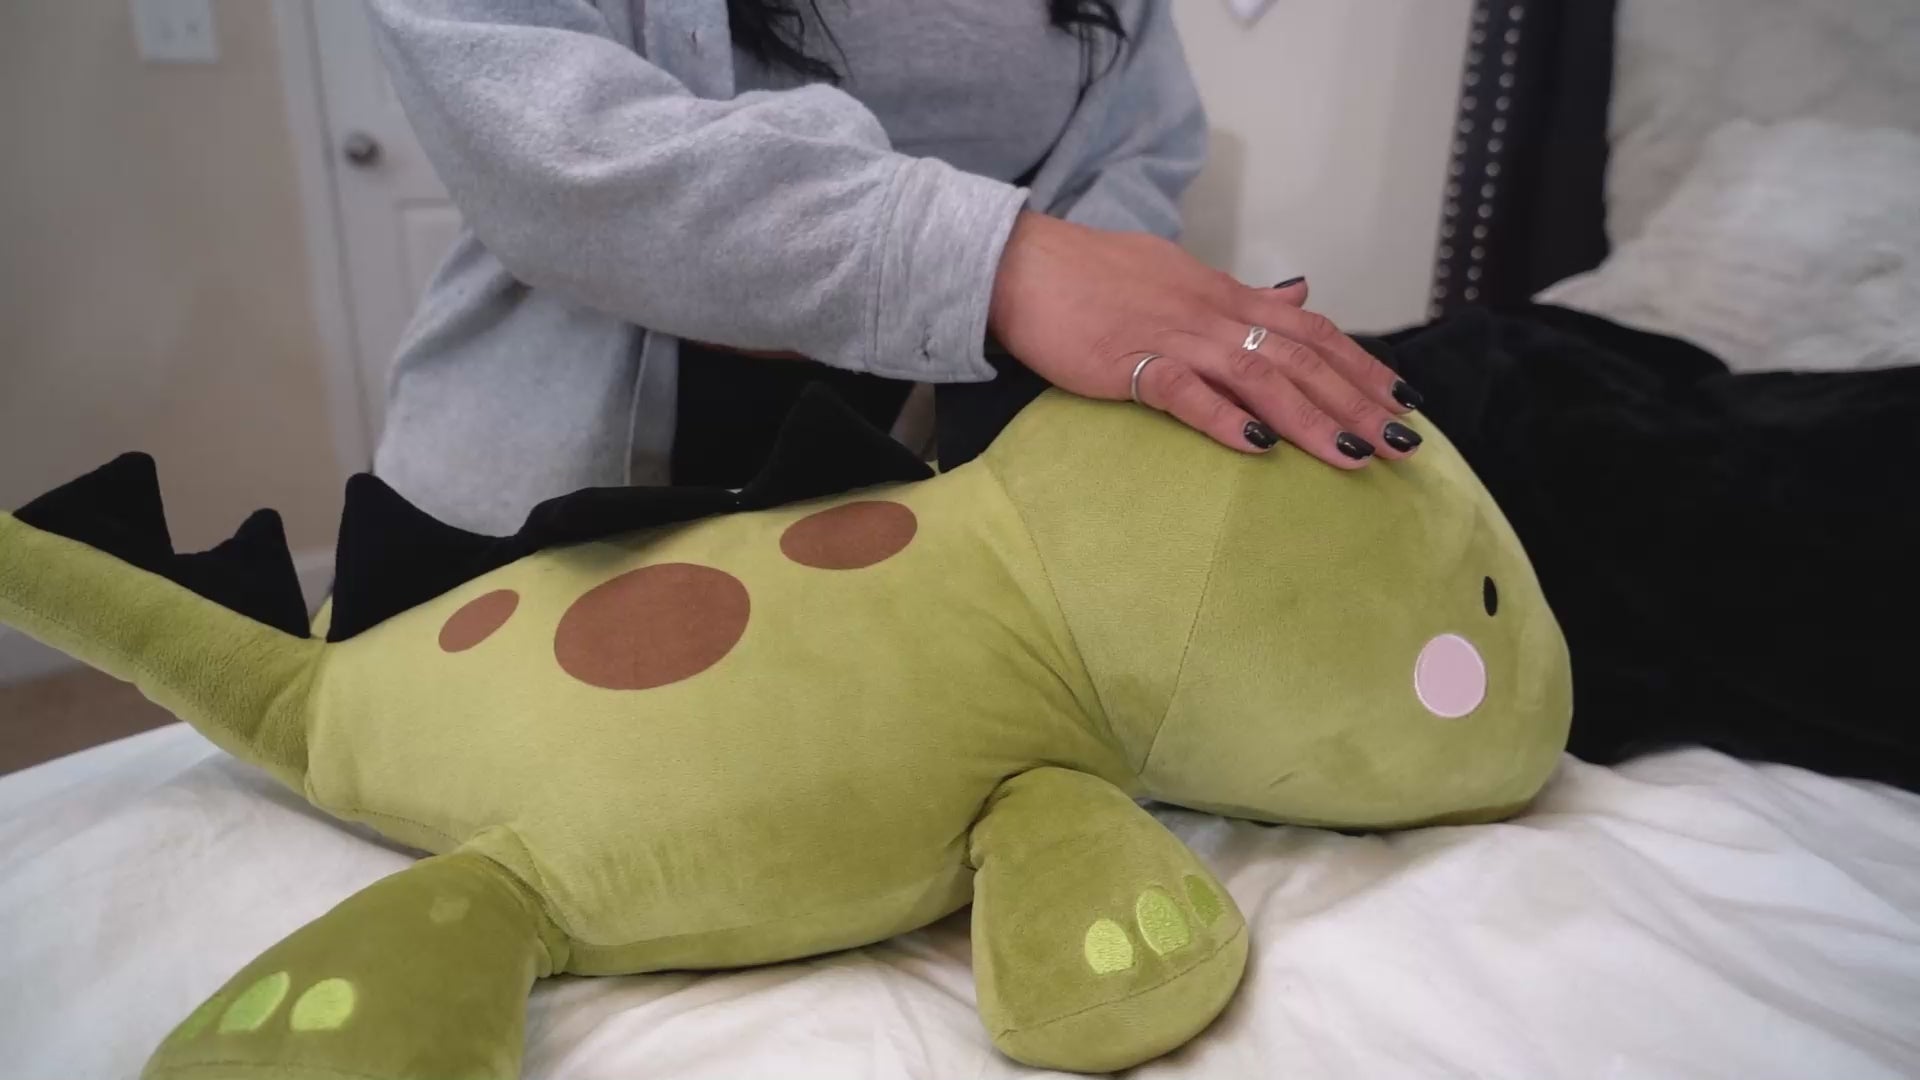 Spike is a soft, cuddly weighted dinosaur plushie.